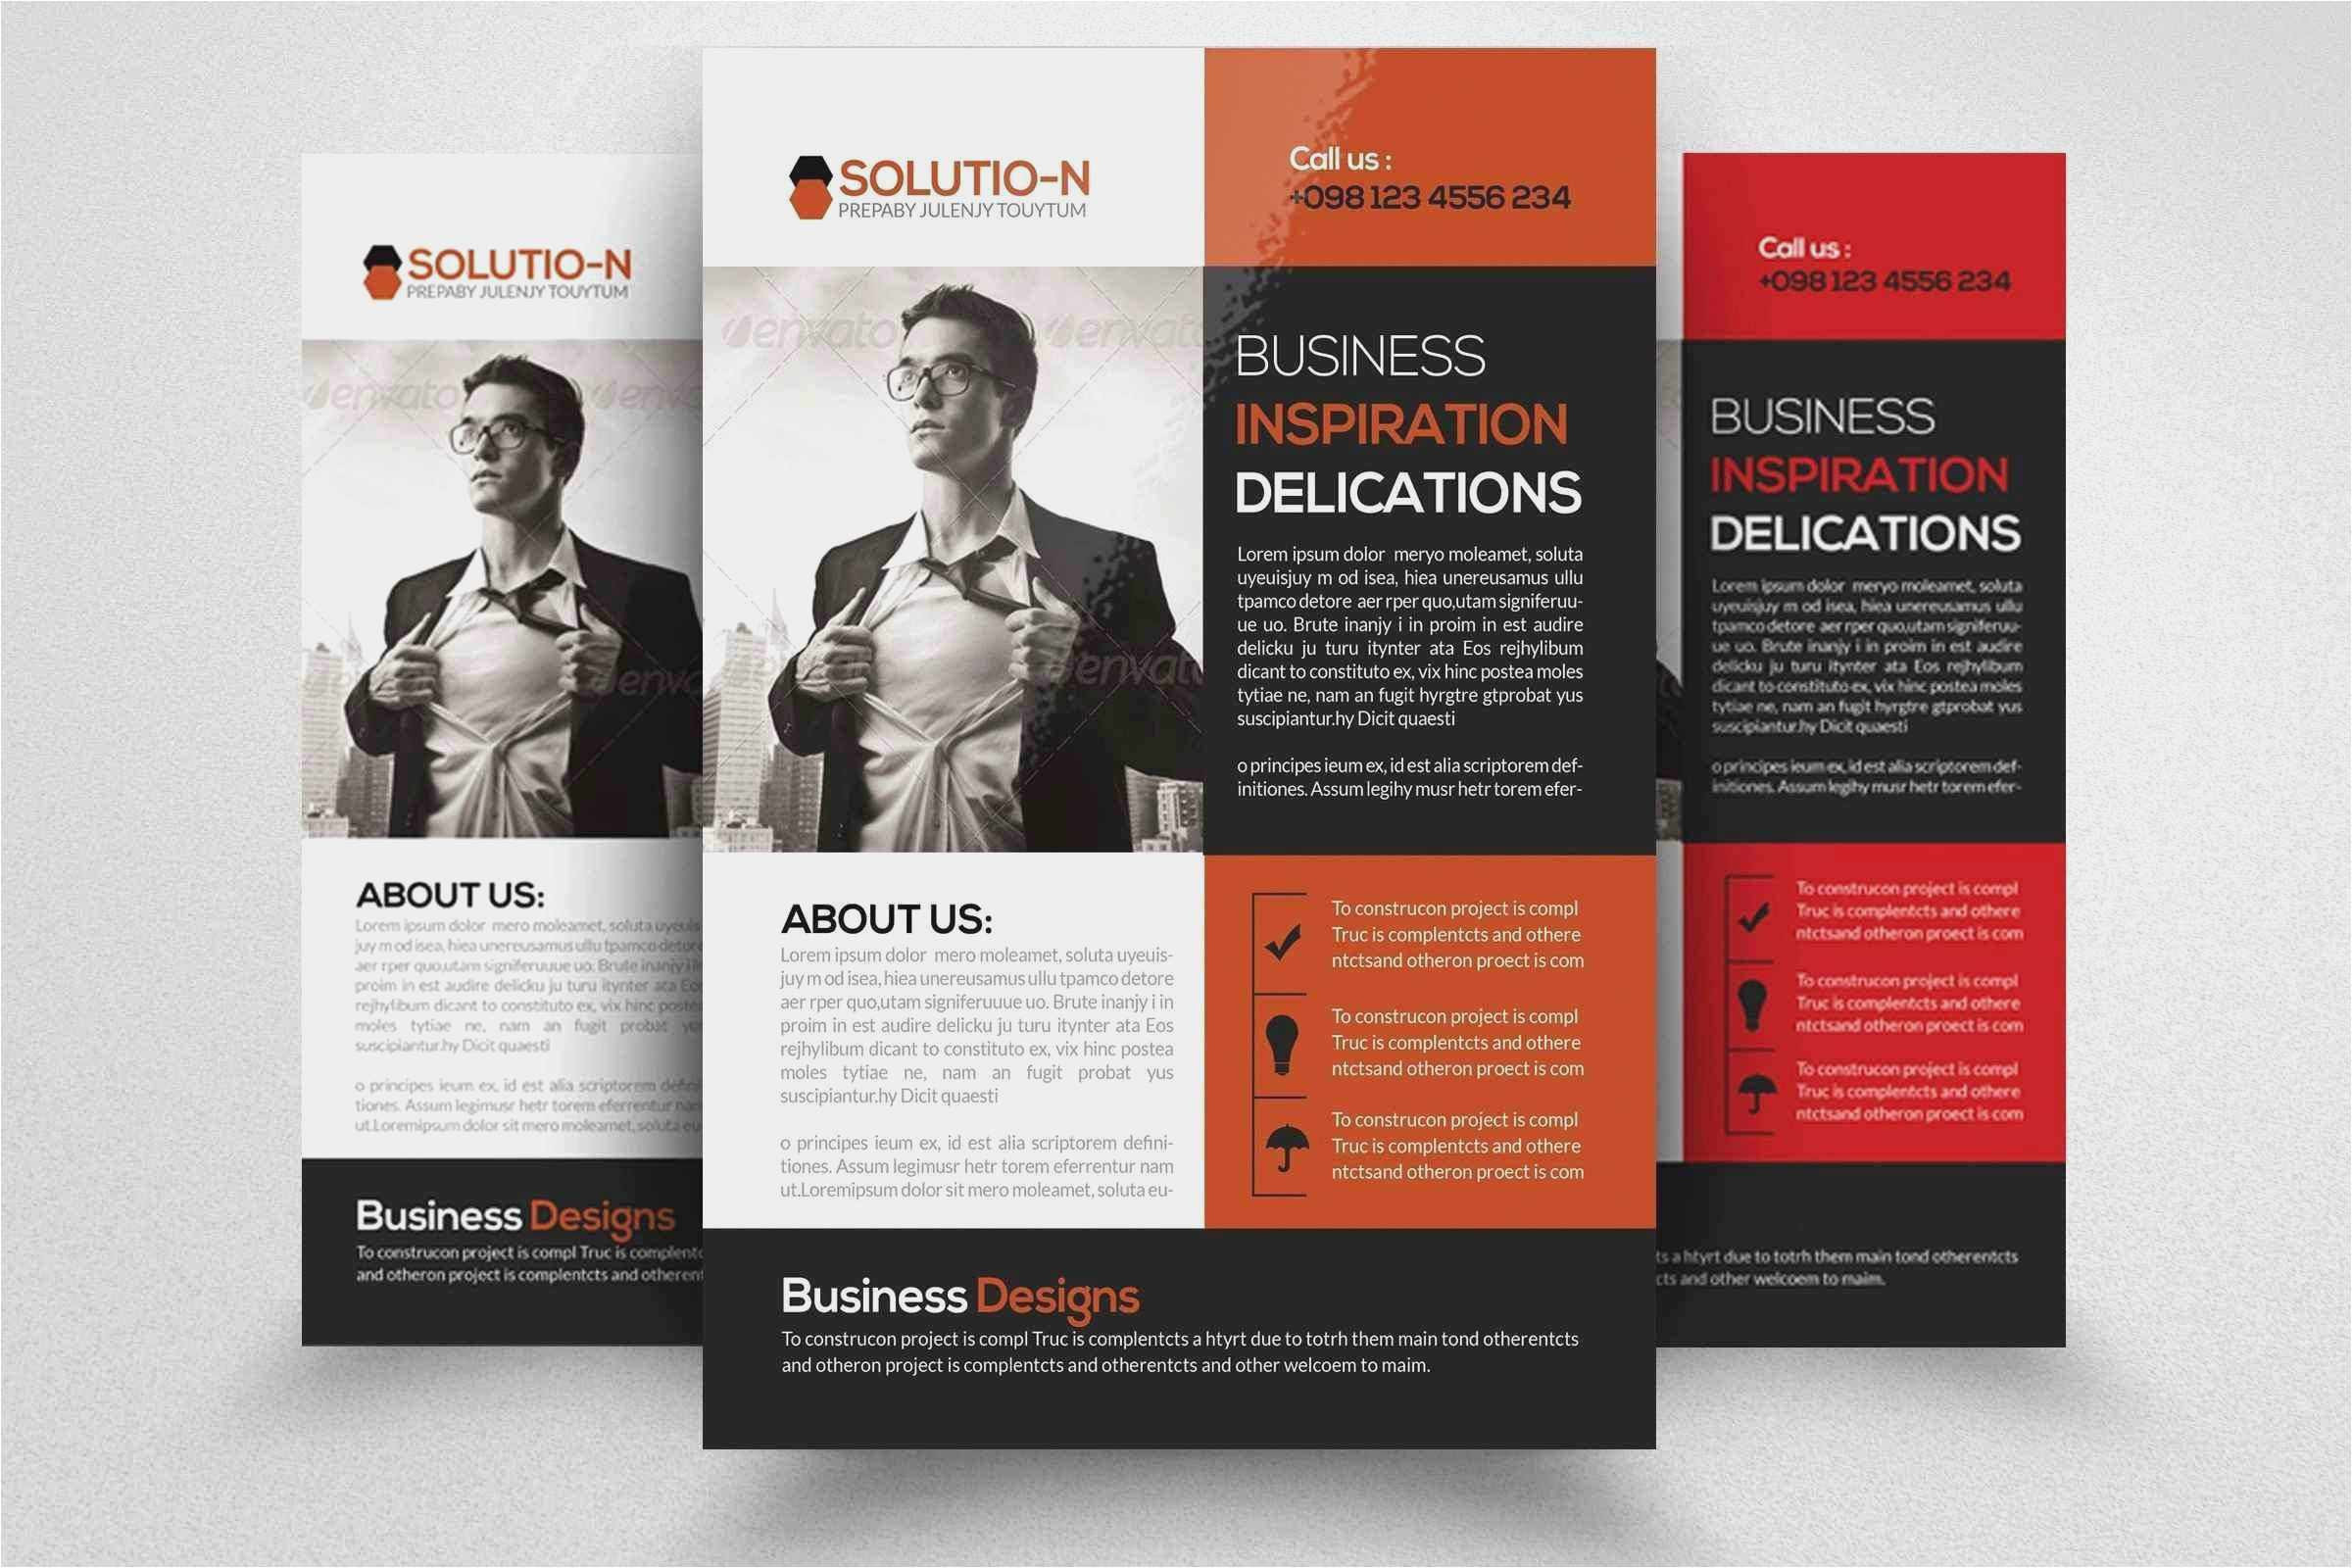 Download 55 Real Estate Flyer Templates Model Of Real Estate Business Cards Templates